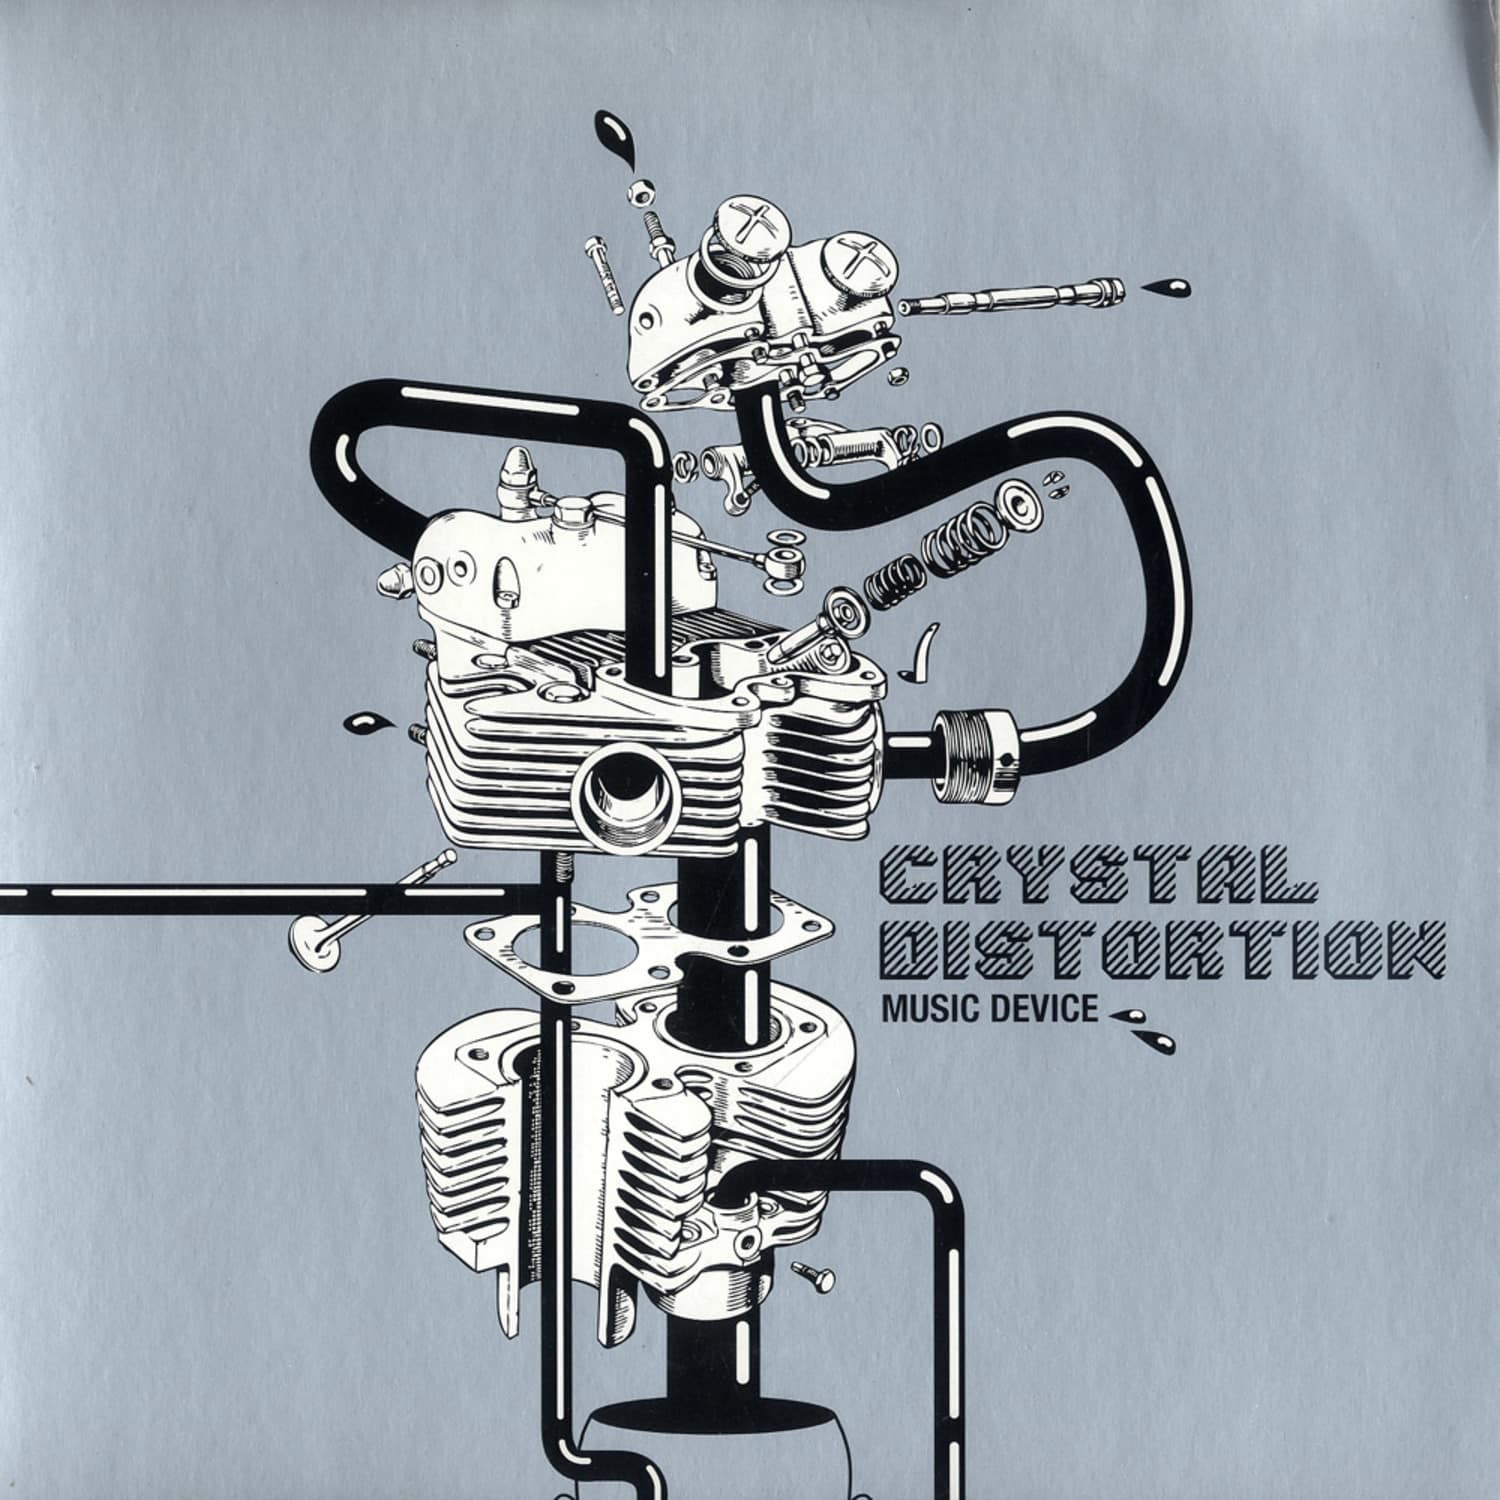 Crystal Distortion - MUSIC DEVICE